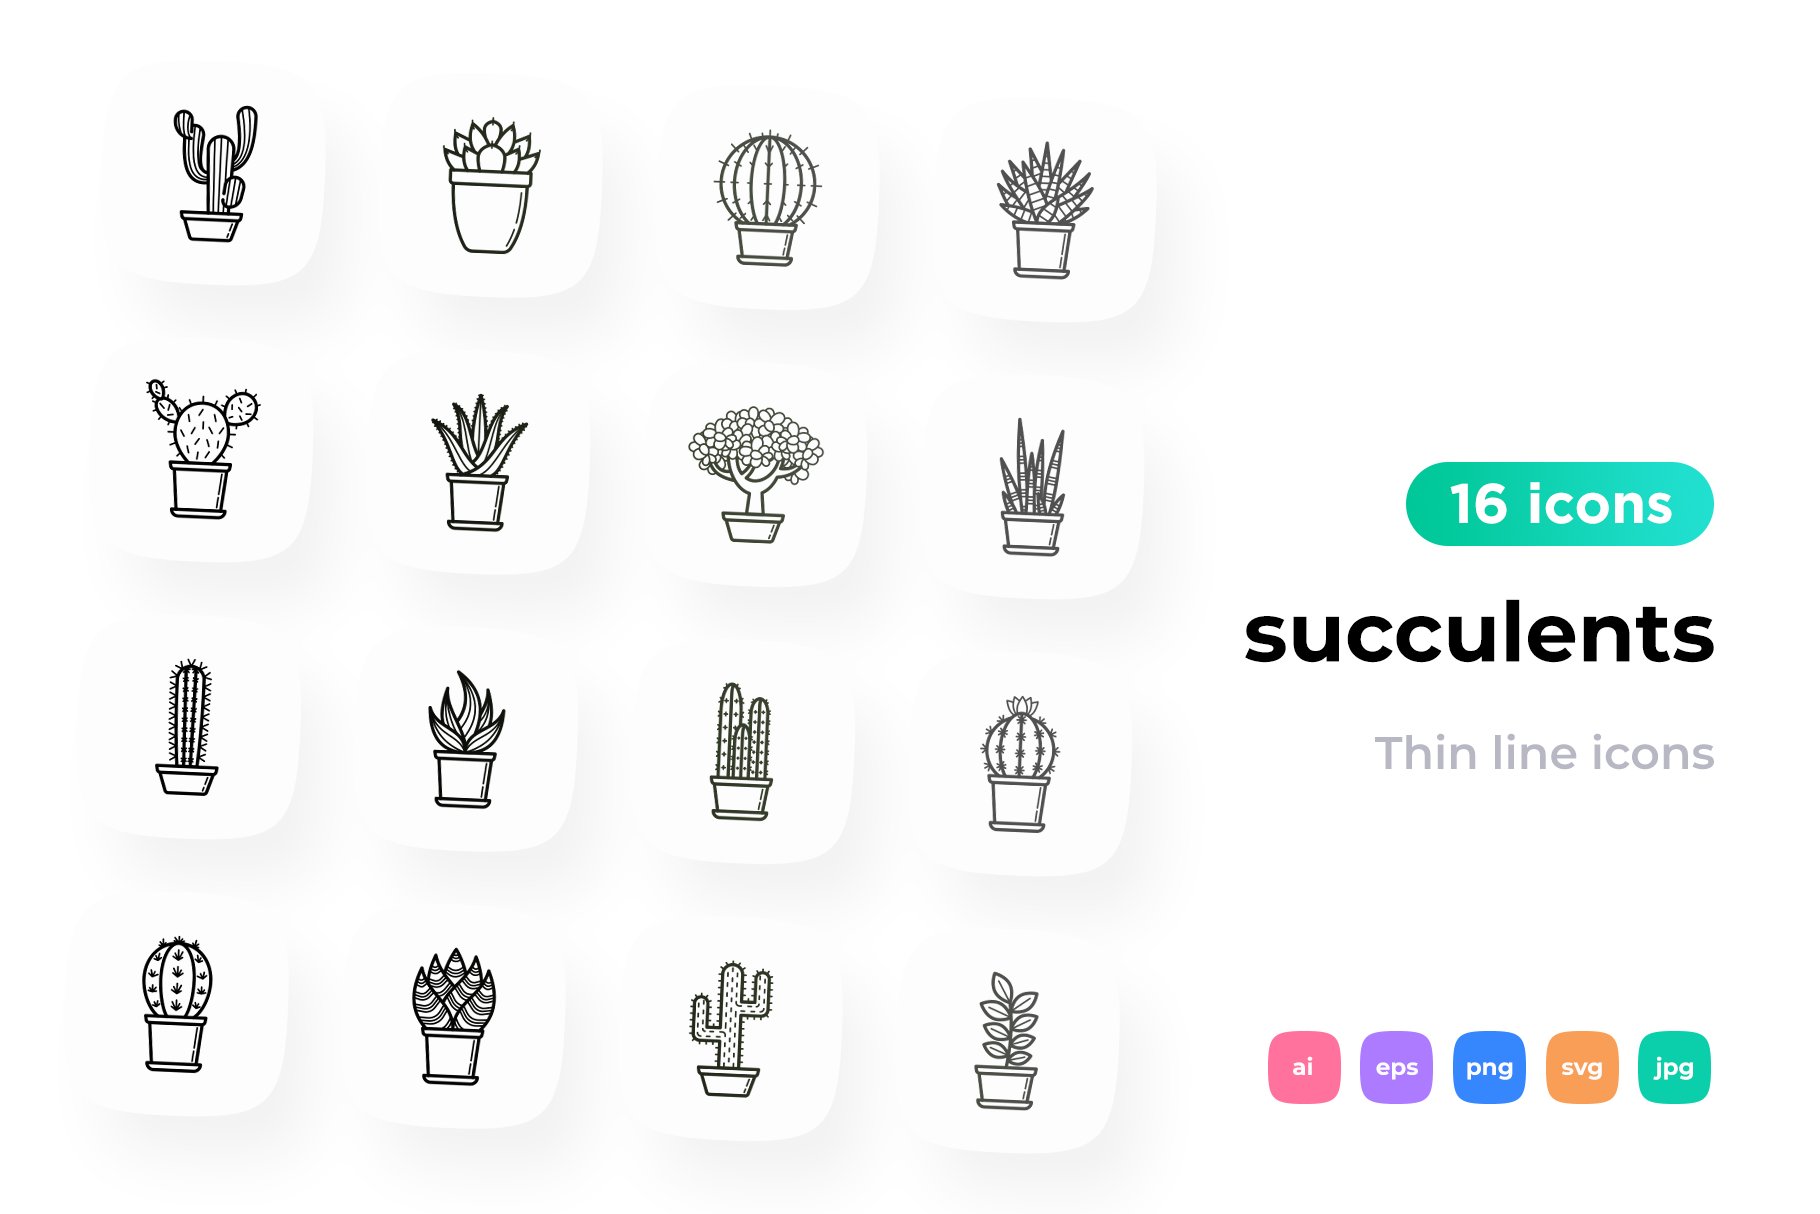 Succulents 16 Thin Line Icons Set cover image.